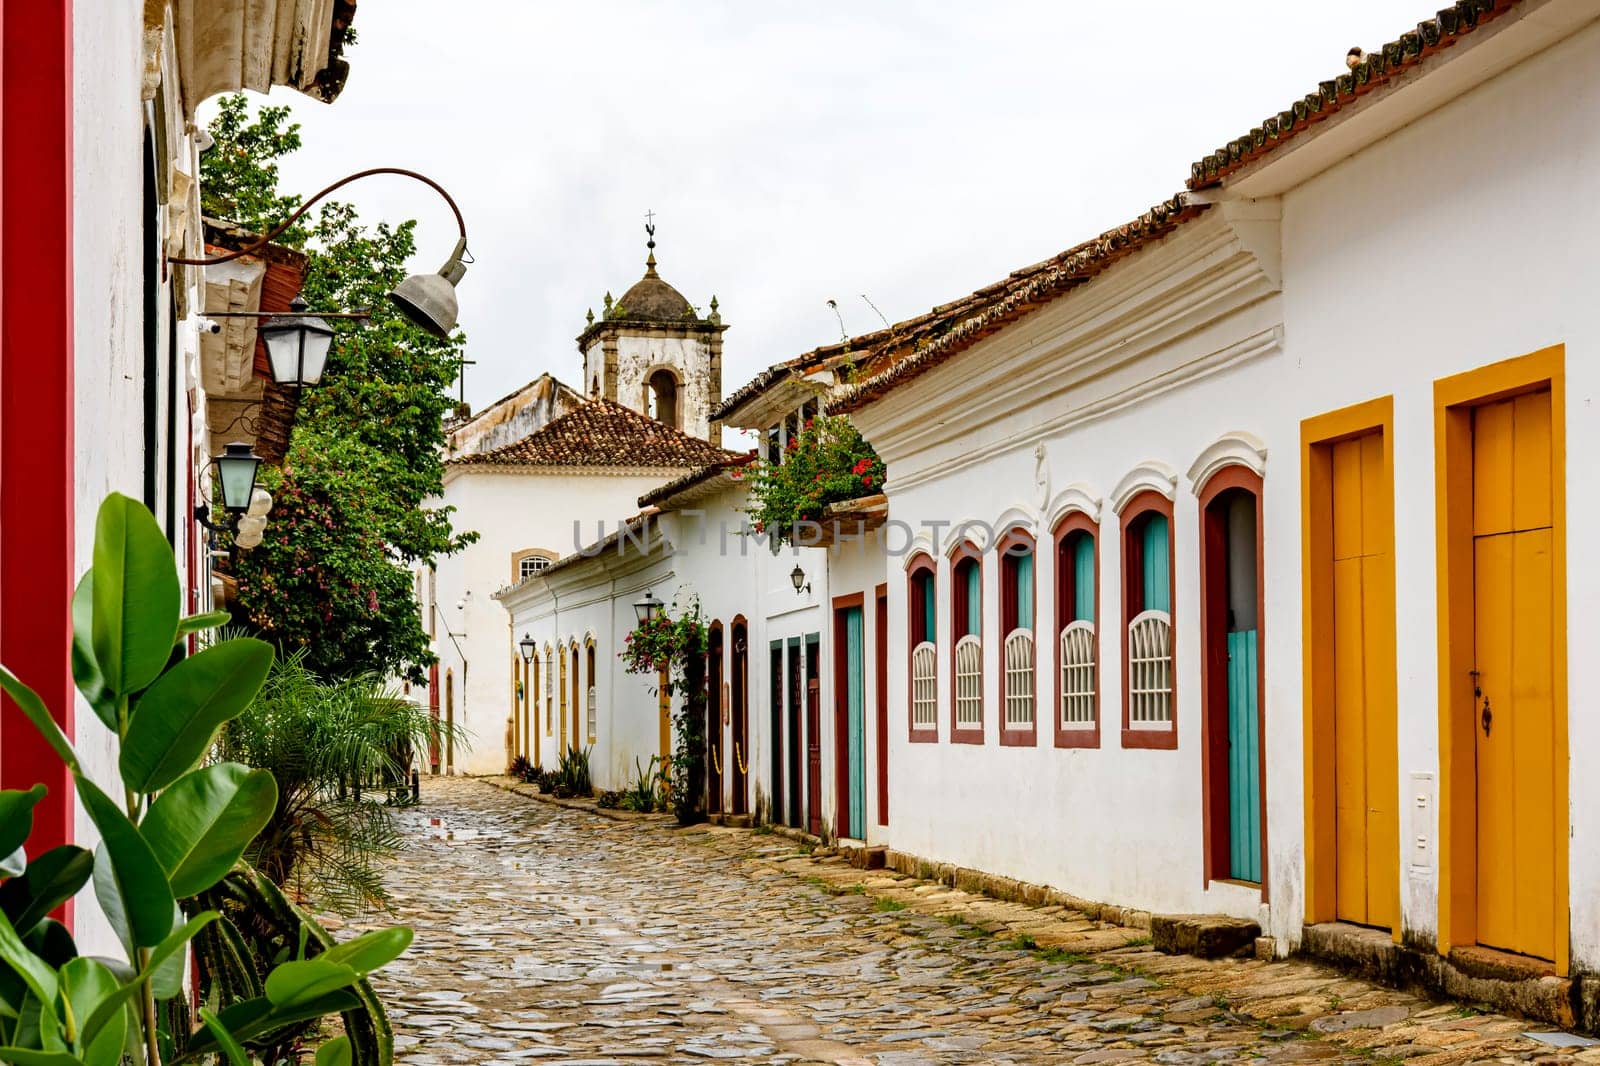 Cobblestone street in the historic center of Paraty with old church in the background